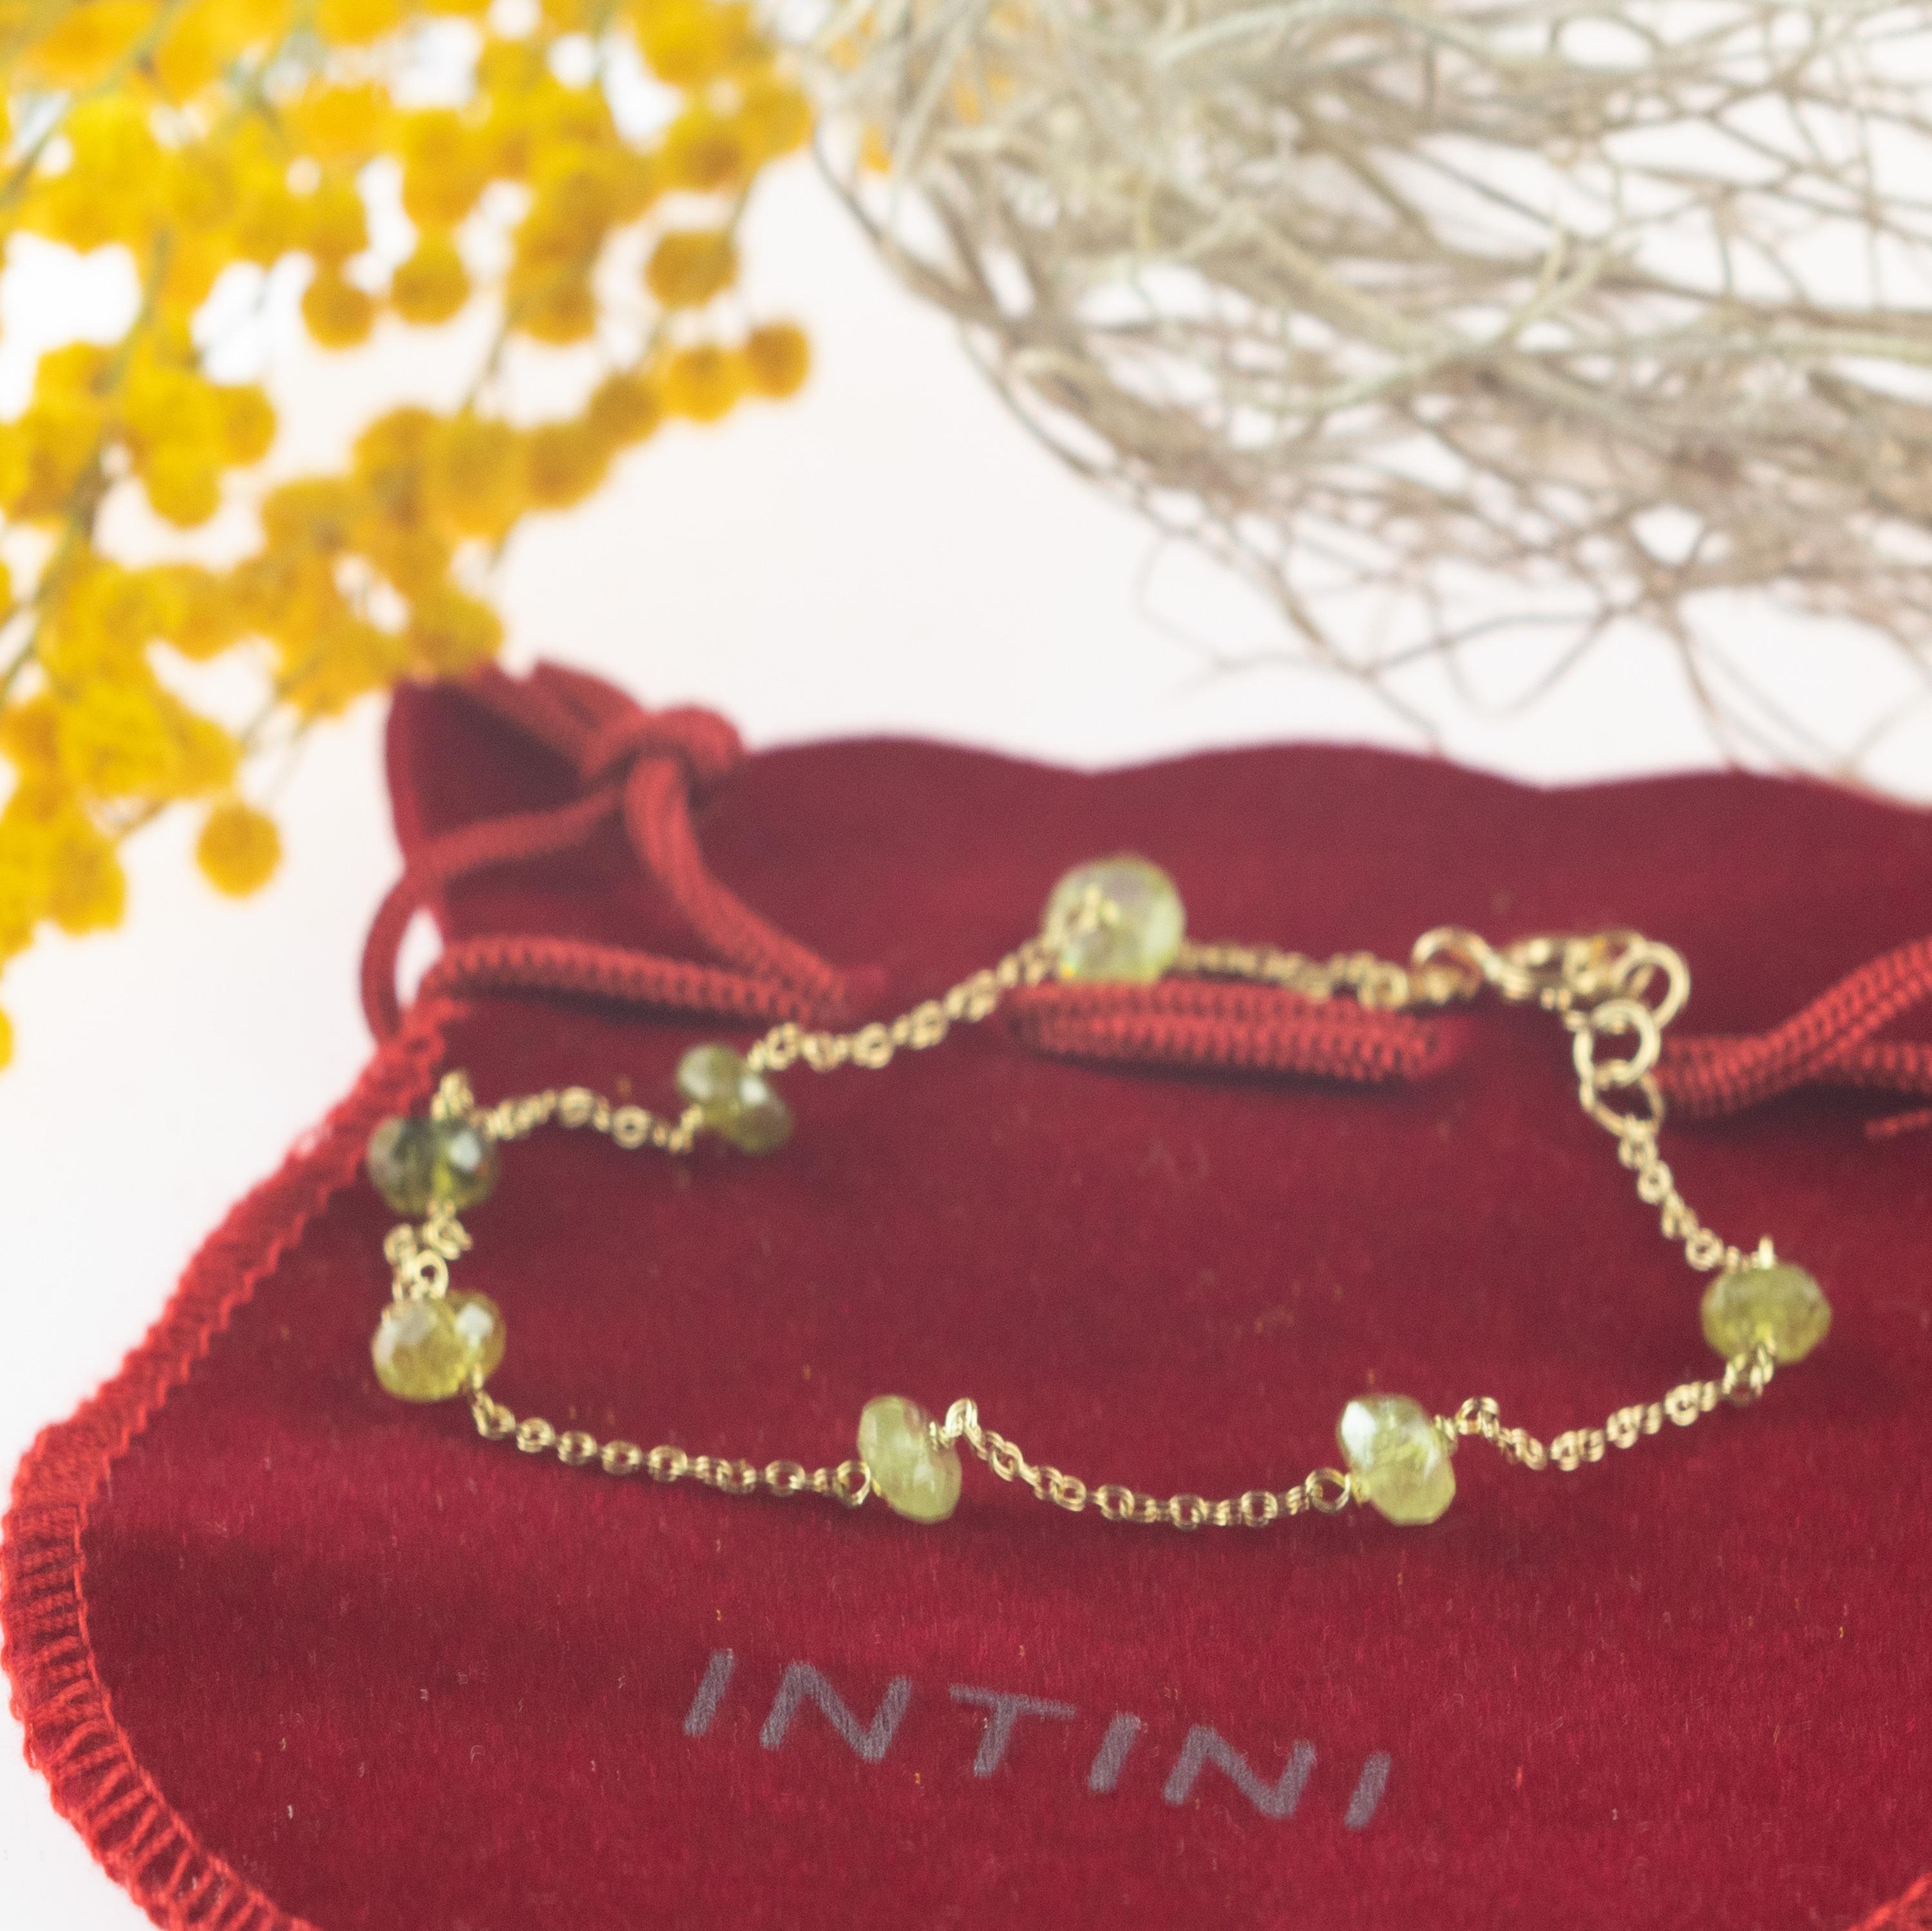 Intini Jewel Gold Plate Chain Green Tourmaline Rondelle Handmade Anklet Bracelet In New Condition For Sale In Milano, IT